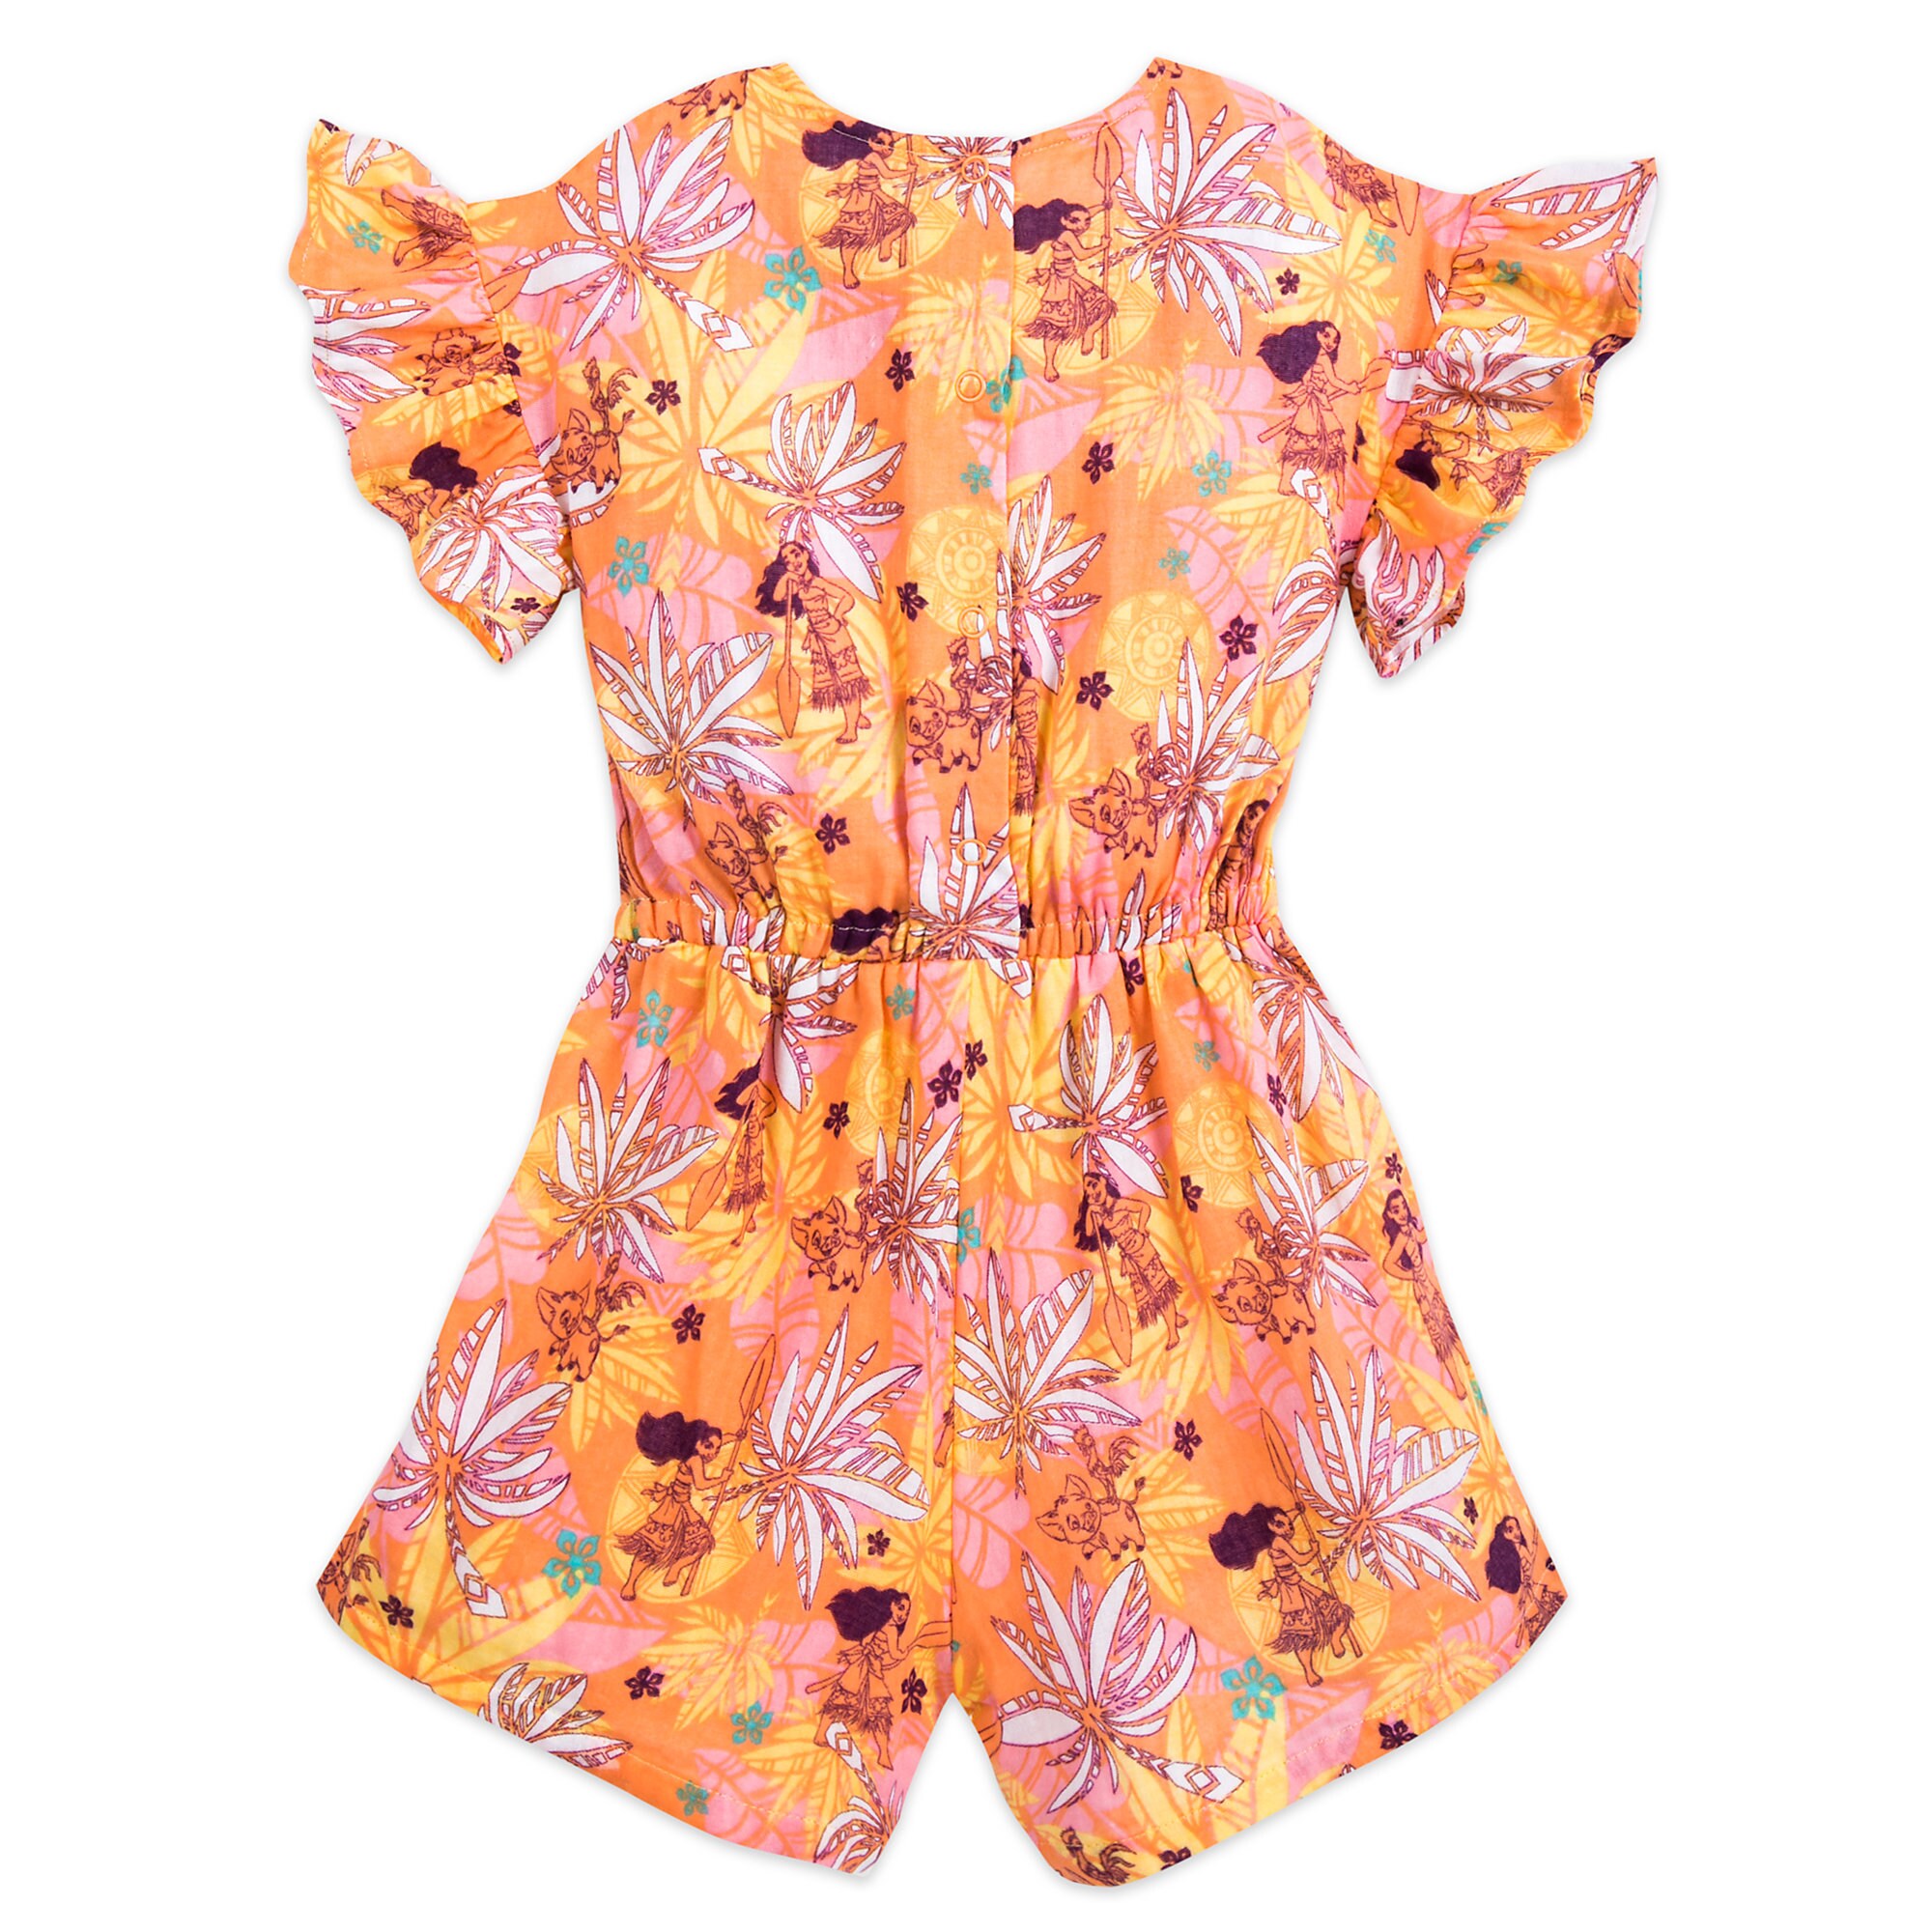 Moana Romper for Girls released today – Dis Merchandise News